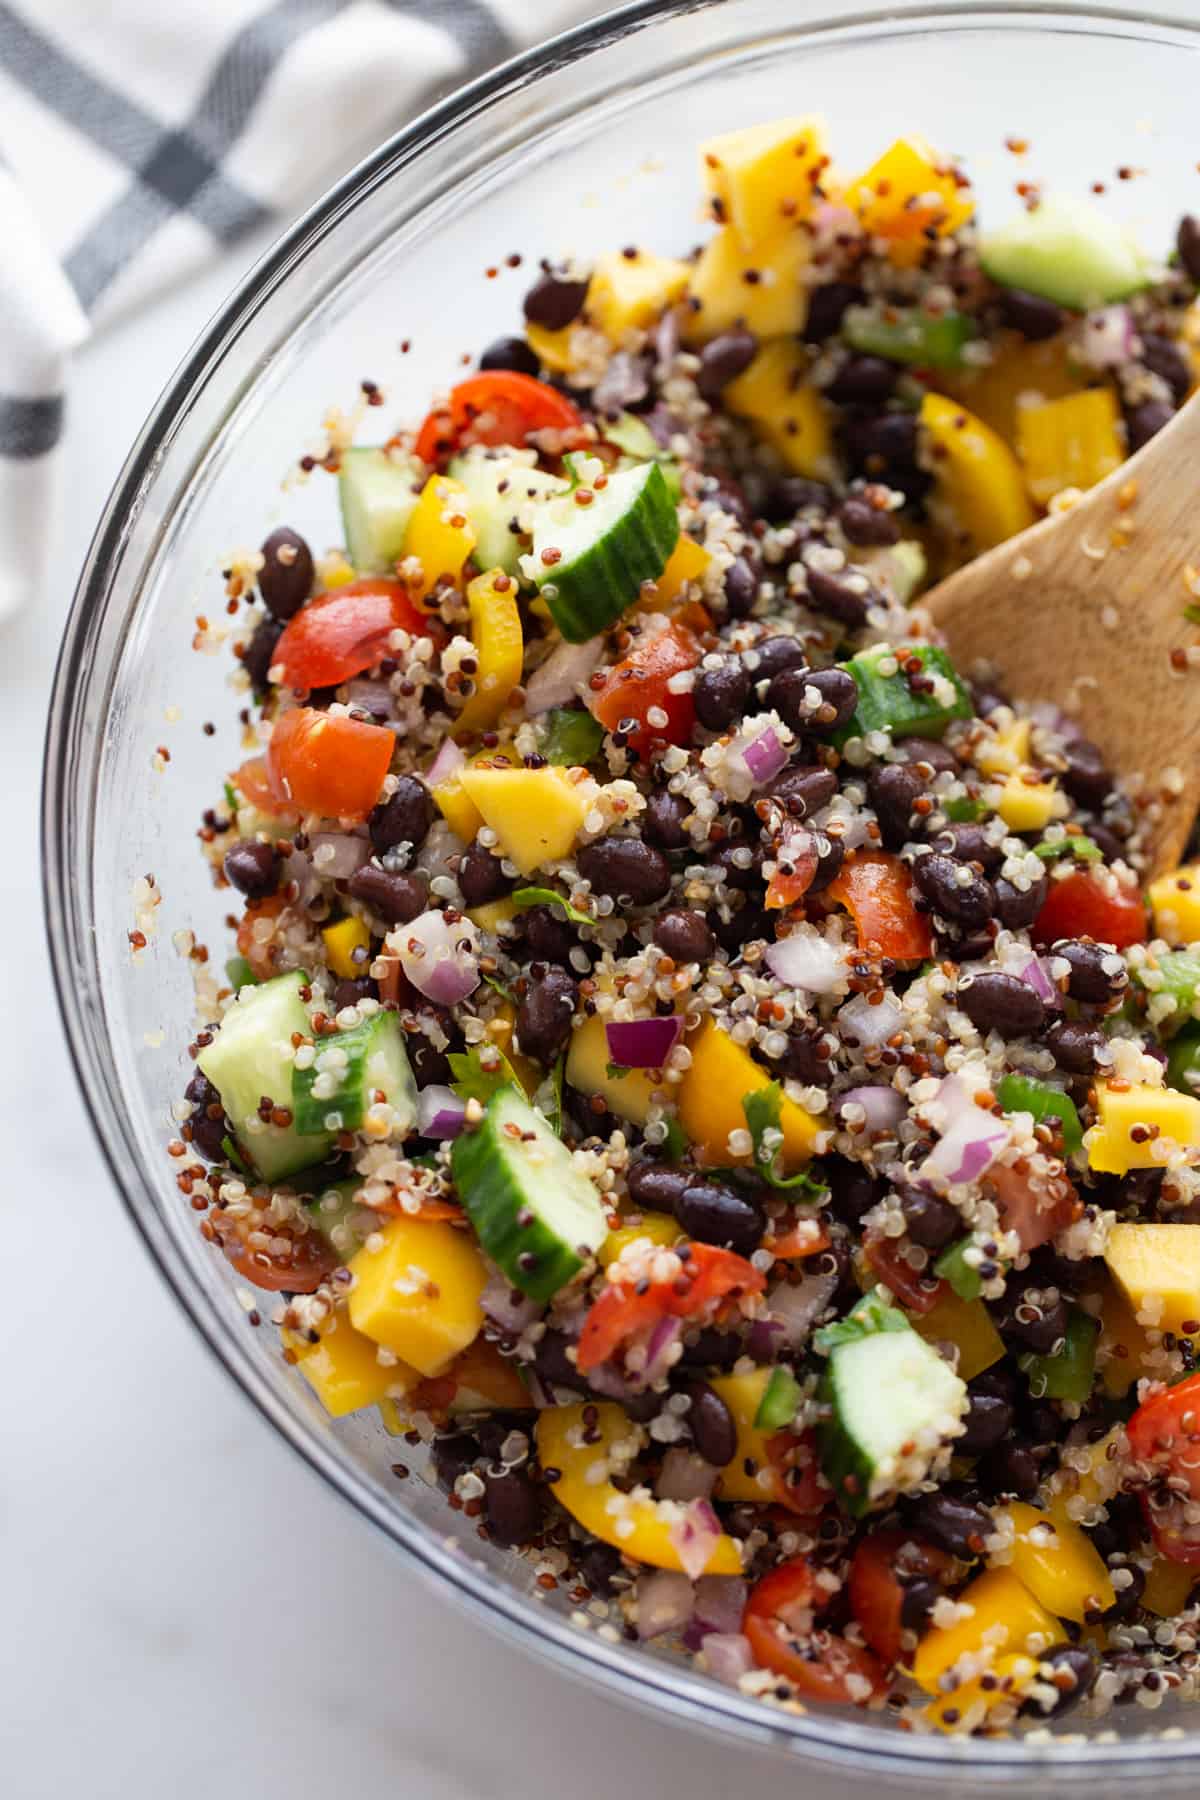 Chopped veggies, black beans, mangoes, and cooked quinoa in a bowl all mixed together.